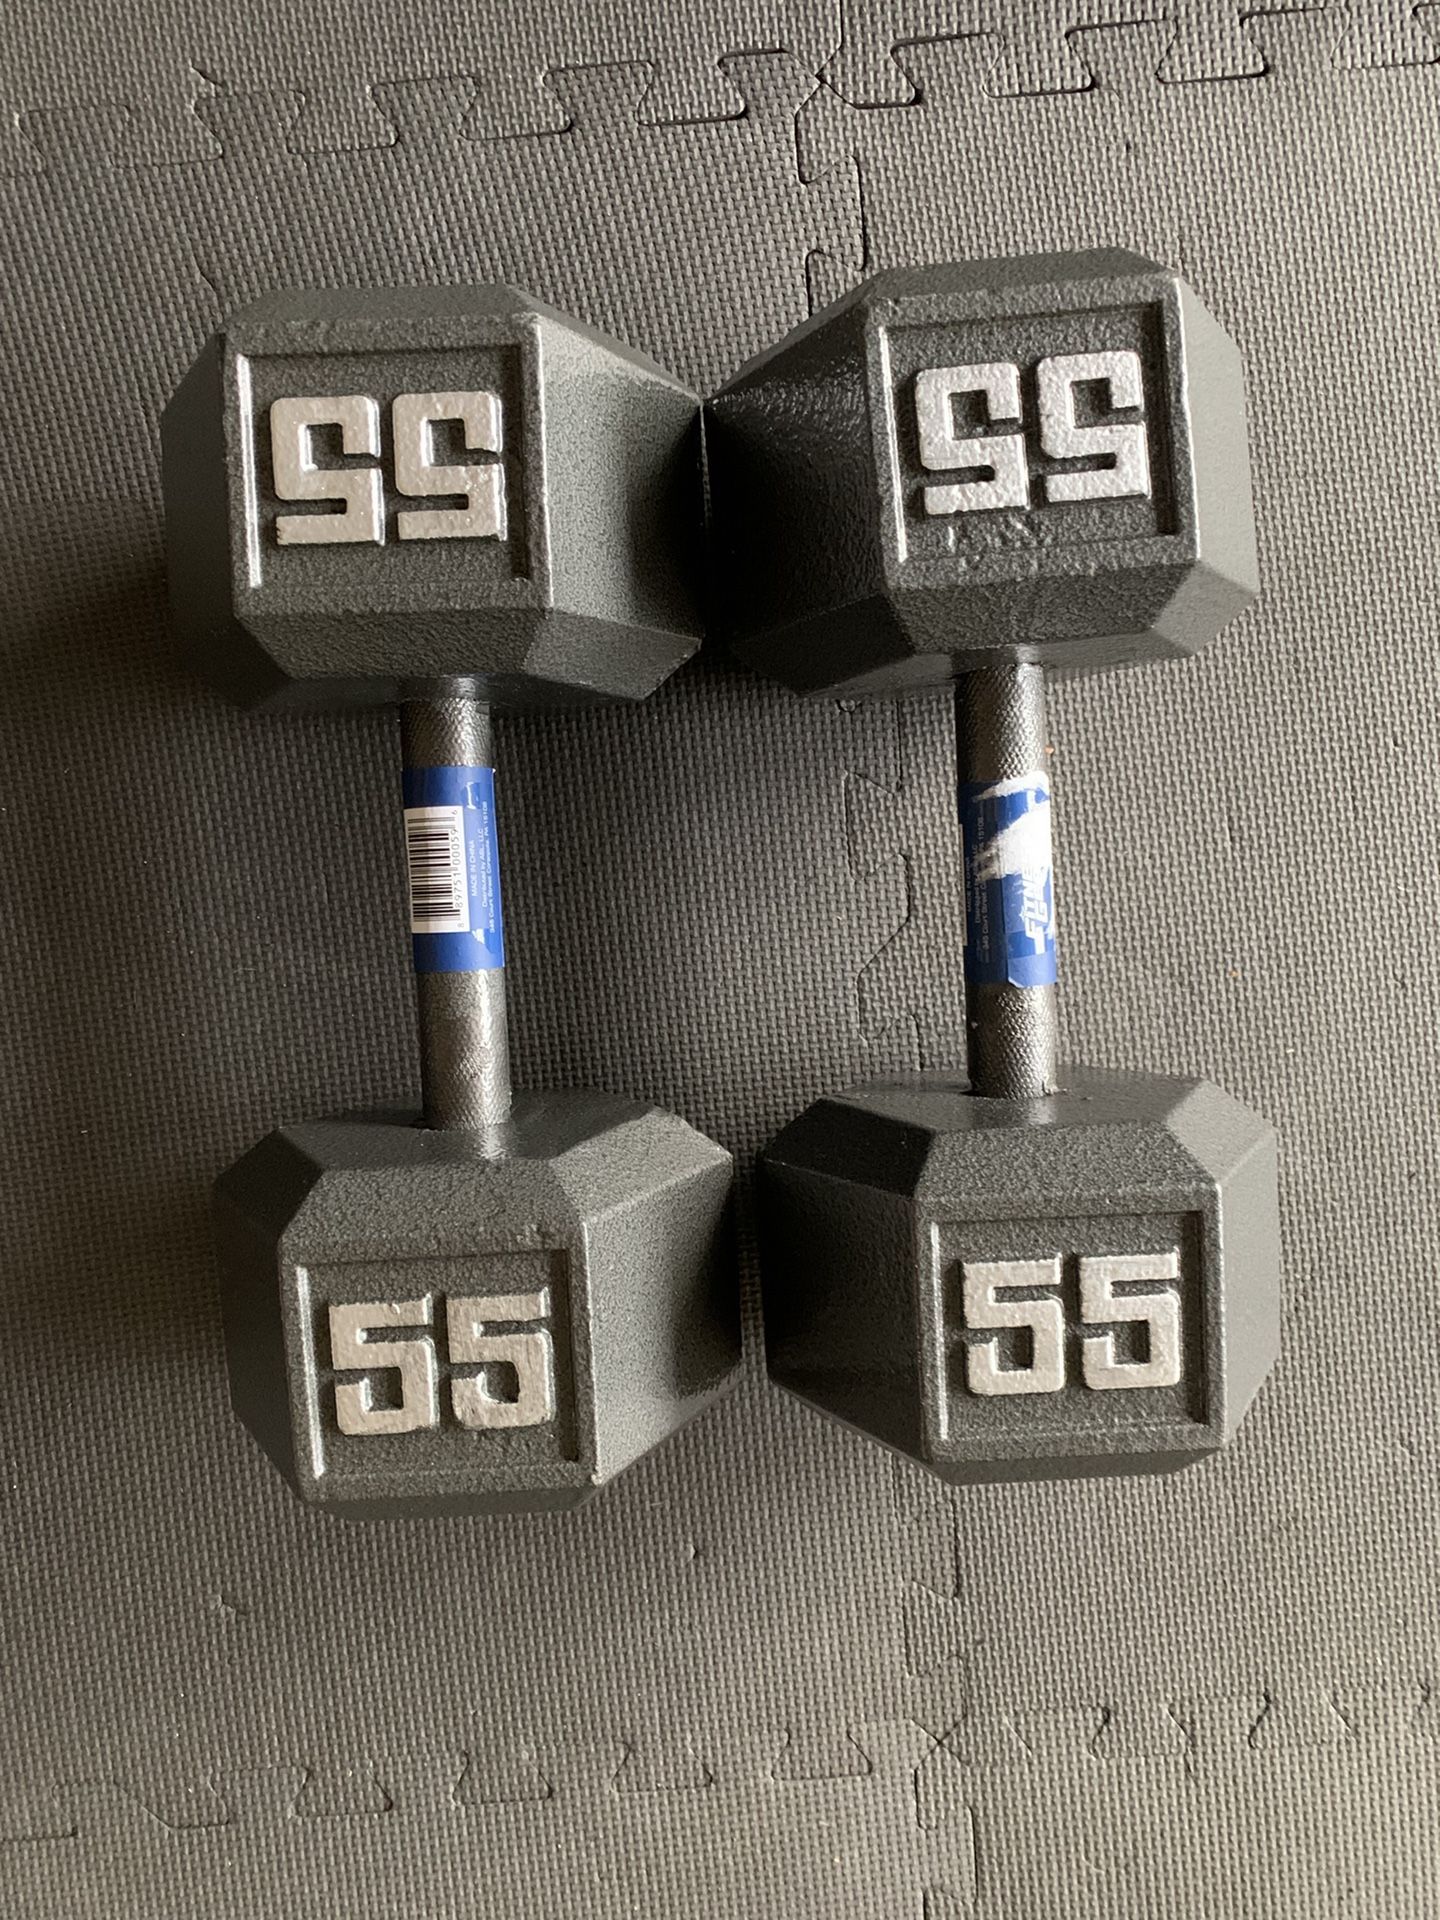 Brand New 55lb hex dumbbell weights! (Pair)